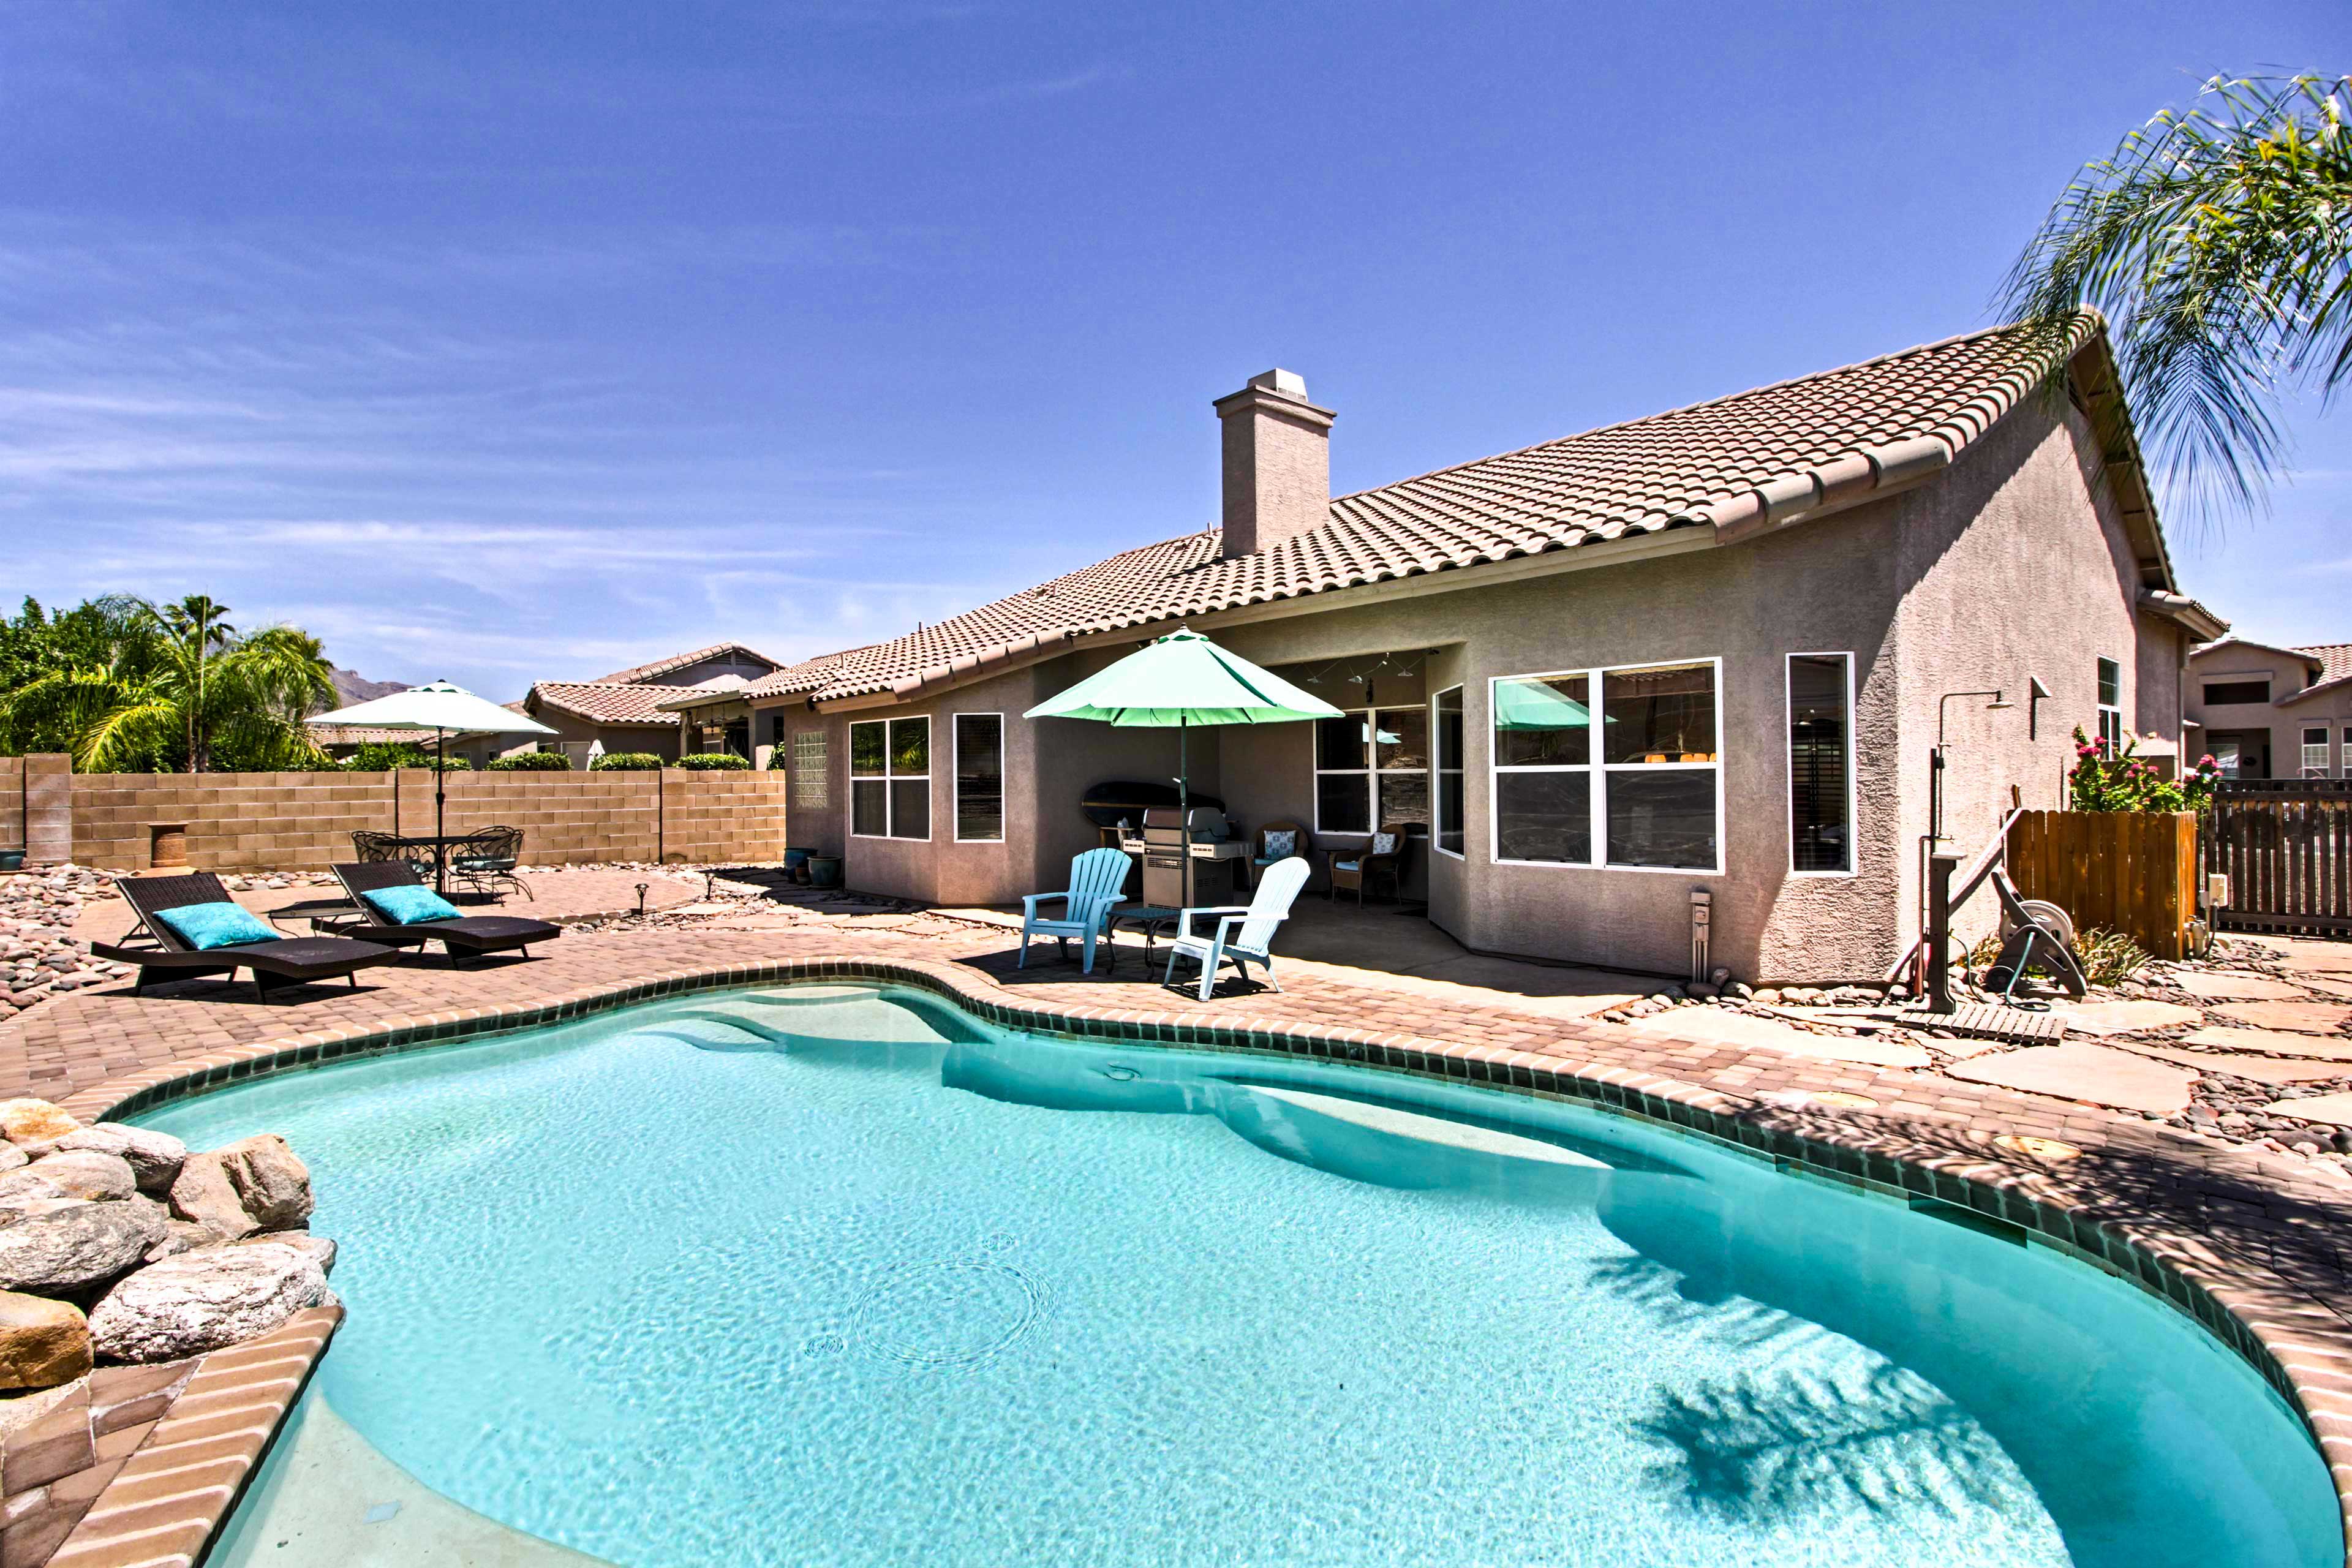 Tucson Vacation Rental | 3BR | 2BA | 2,115 Sq Ft | Step-Free Access